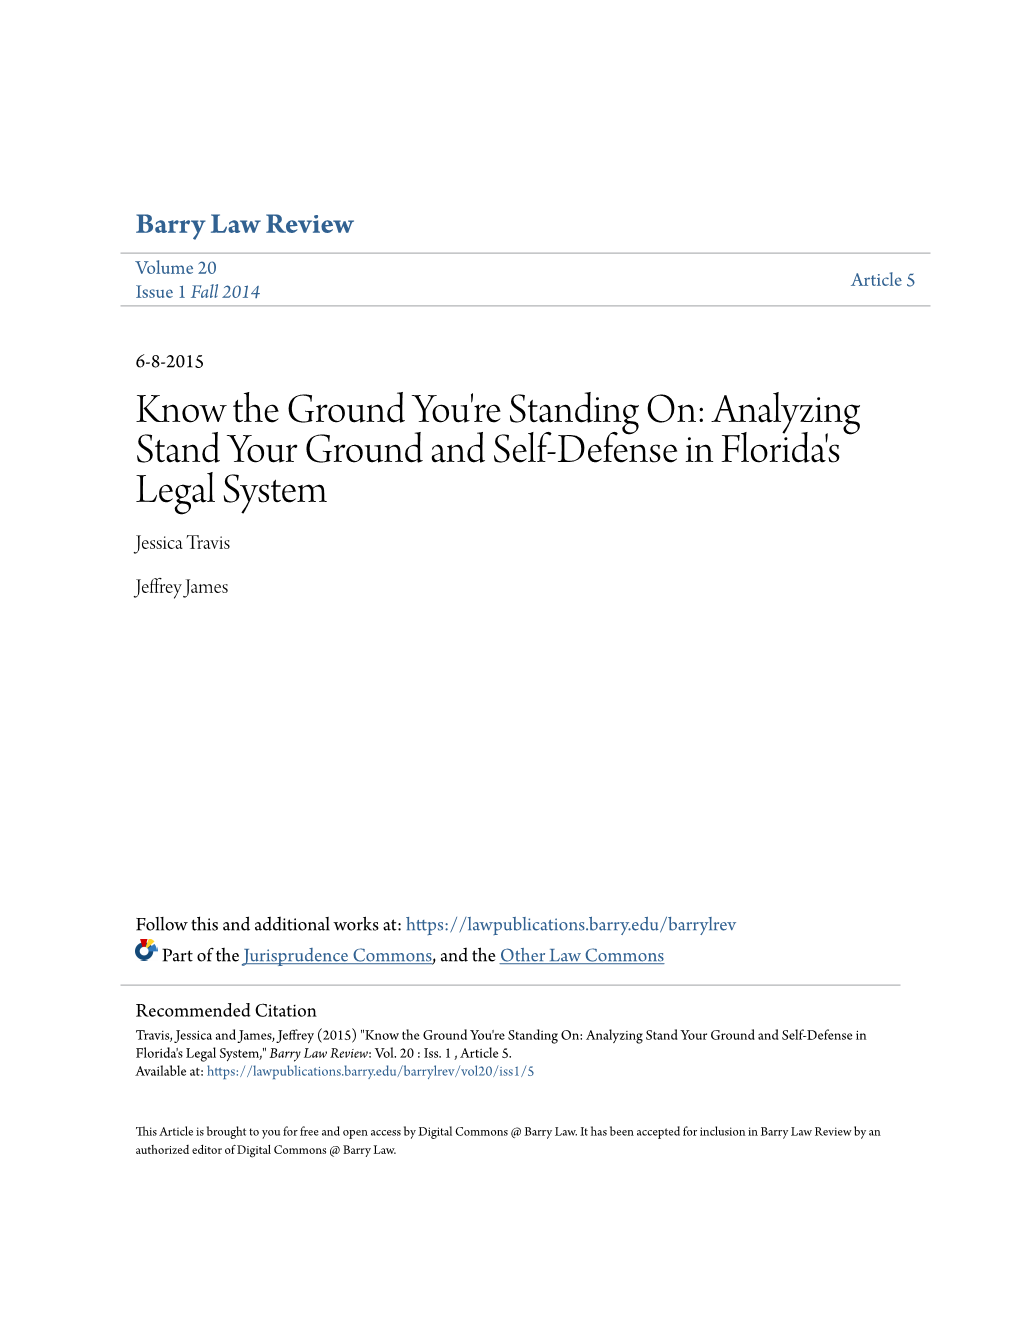 Analyzing Stand Your Ground and Self-Defense in Florida's Legal System Jessica Travis